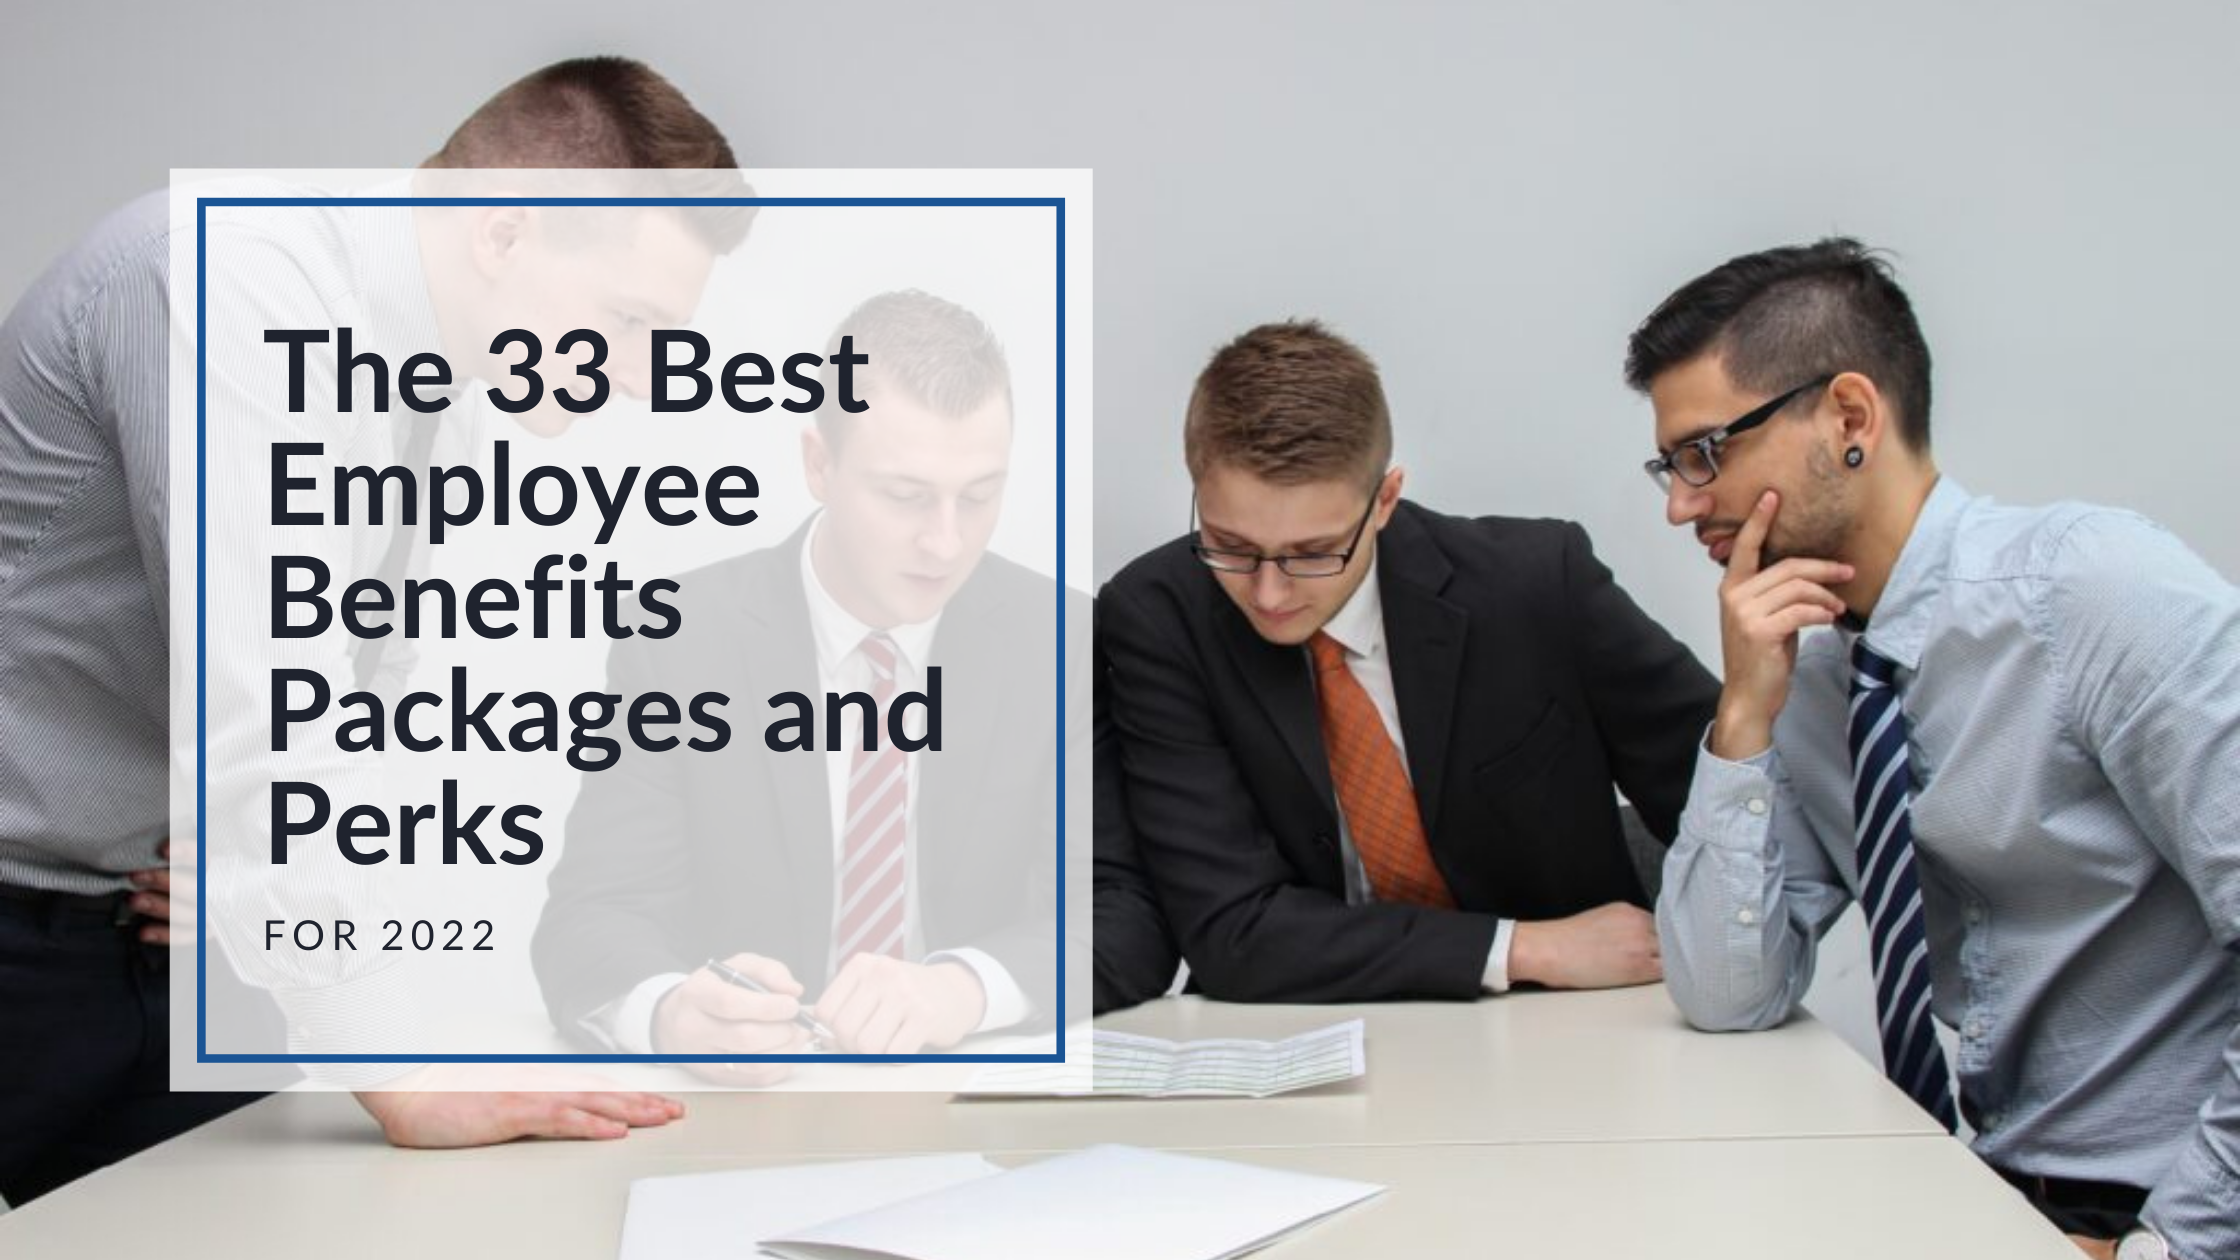 The 33 Best Employee Benefits Packages and Perks for 2021